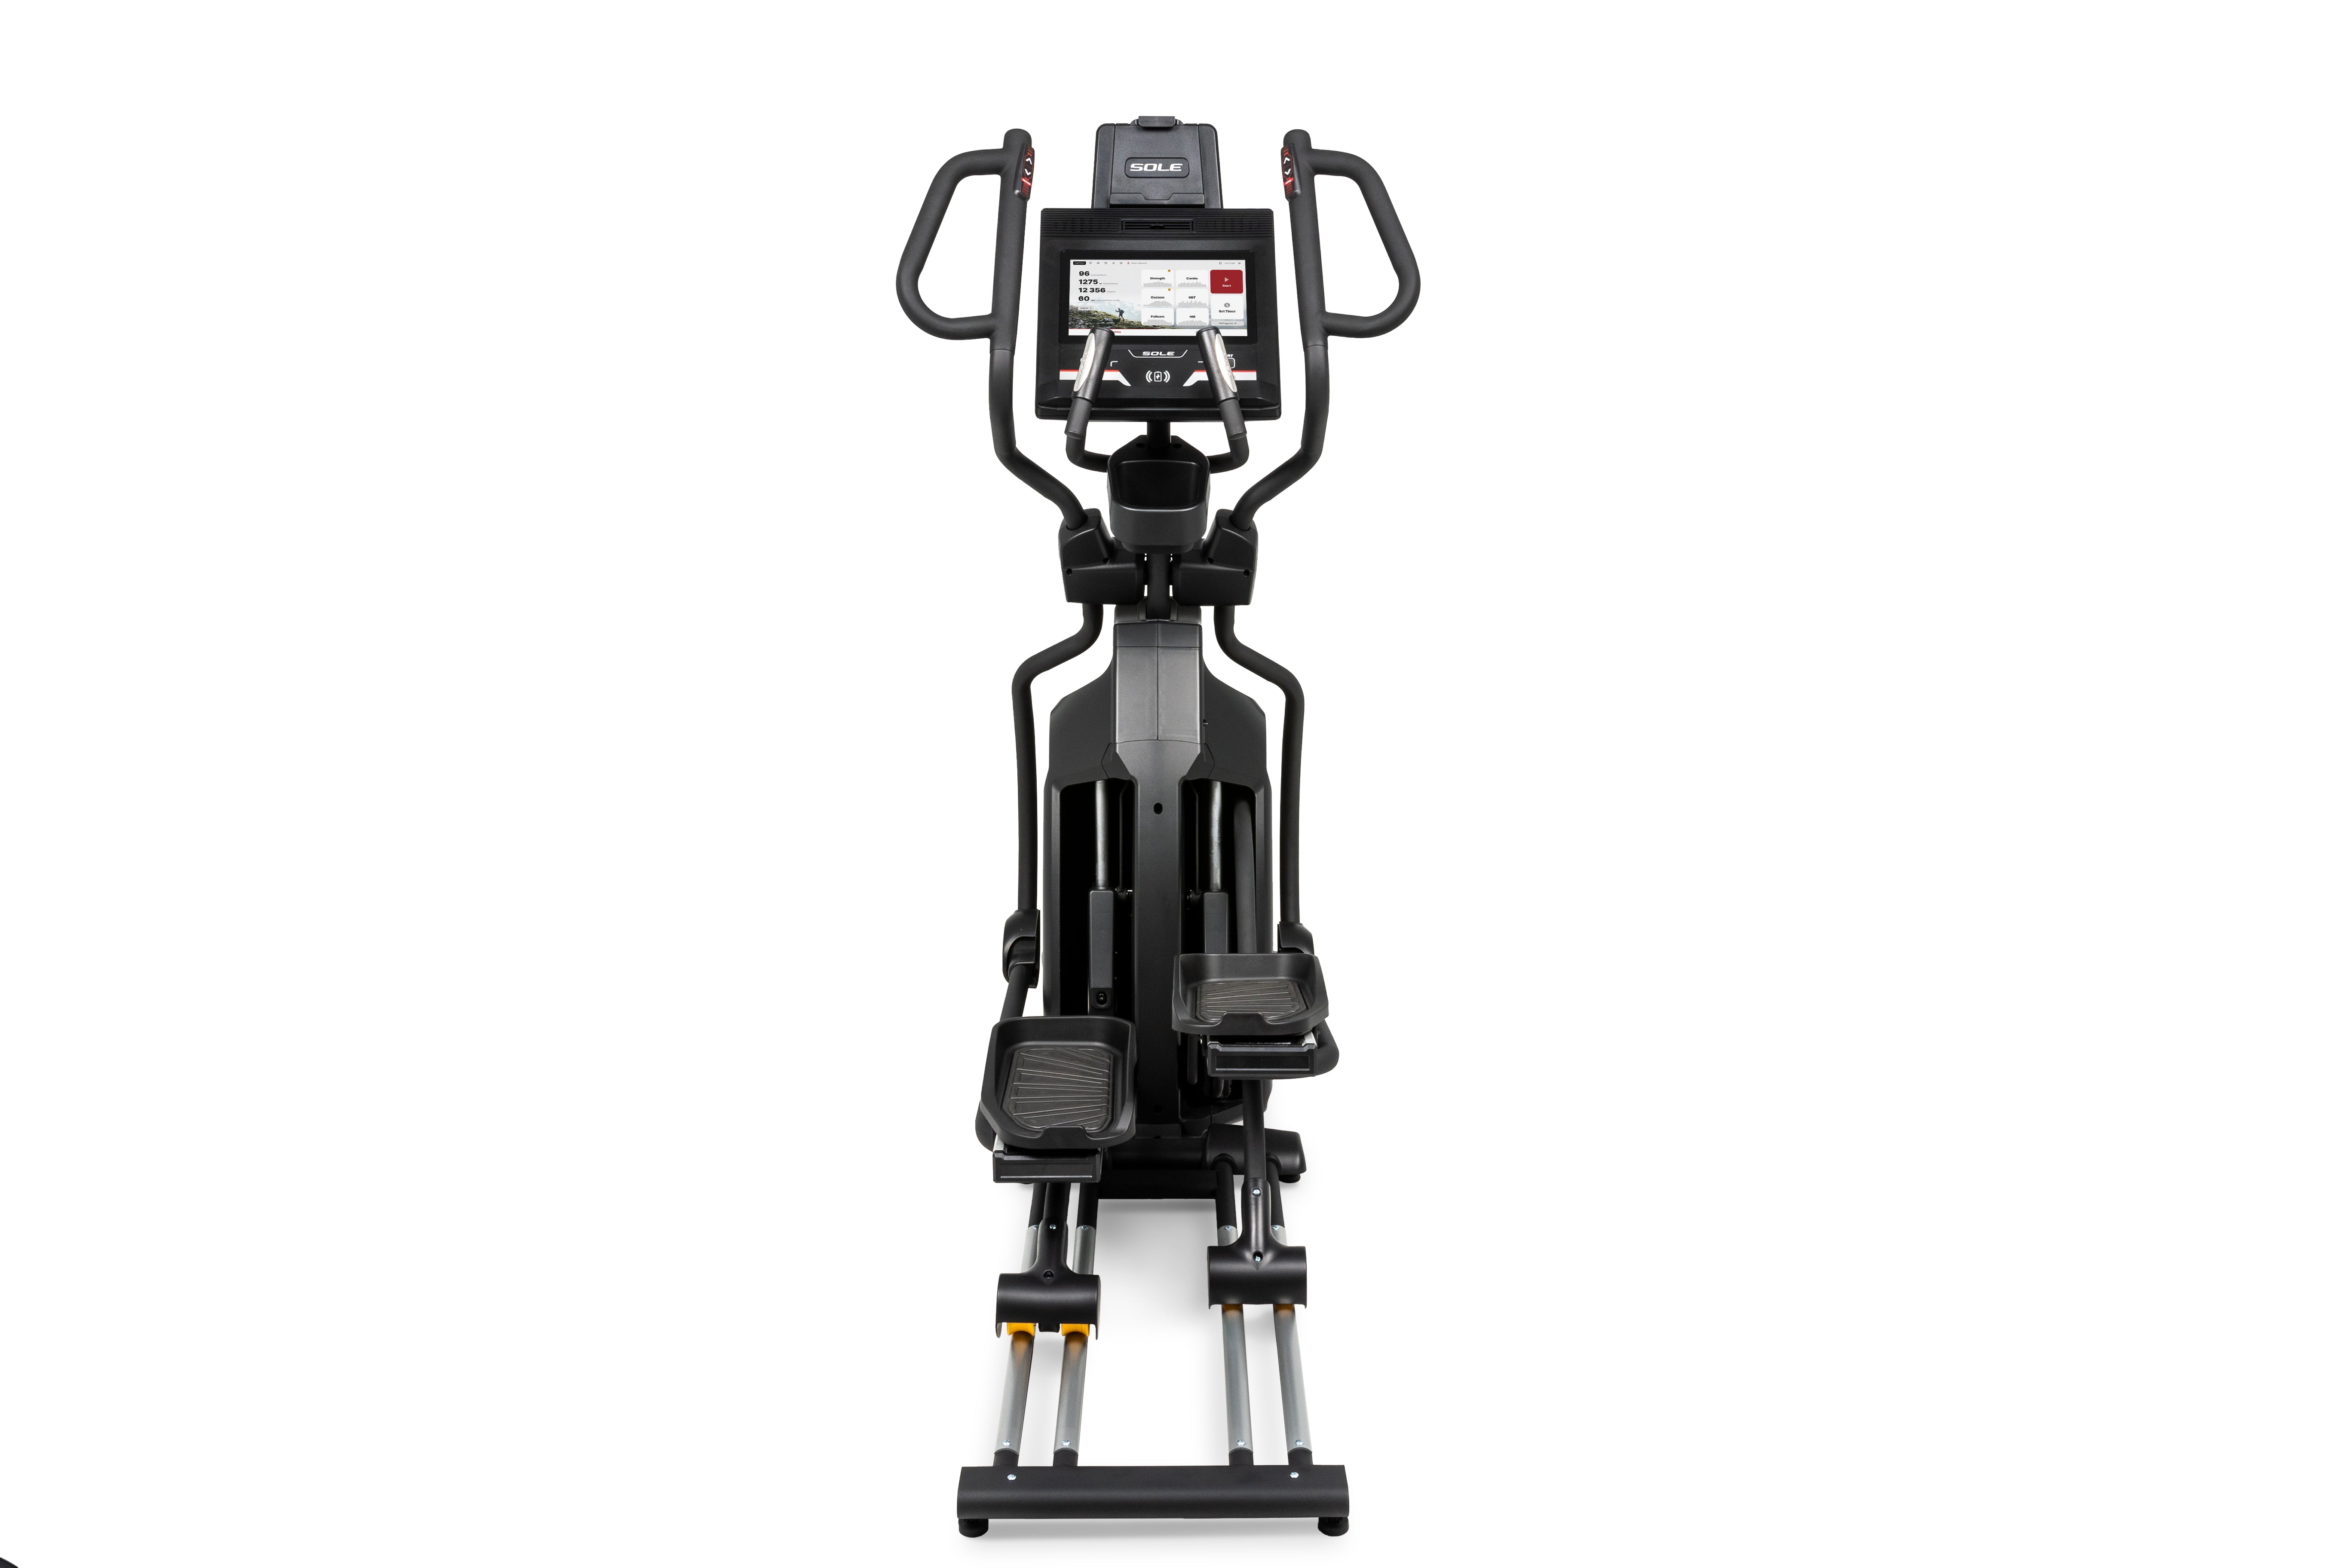 Frontal view of the Sole E95S elliptical machine showcasing its digital screen with workout metrics, dual handlebars, central column with adjustable footrests, and a sturdy base with yellow rollers.